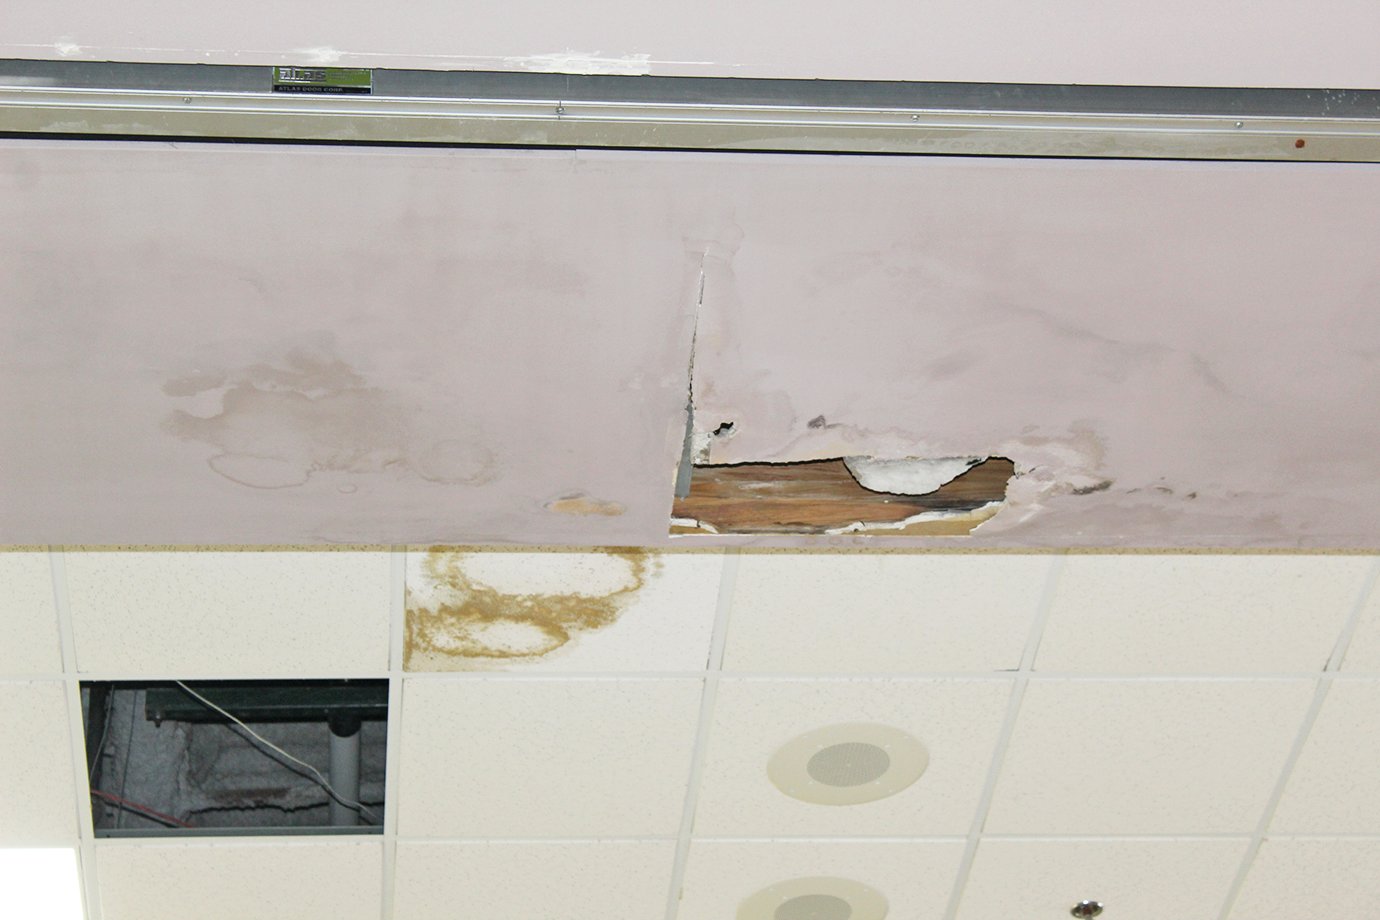 One of the many reasons for renovation efforts at Crawfordsville High School is a leaking roof, seen here outside the school's auditorium.